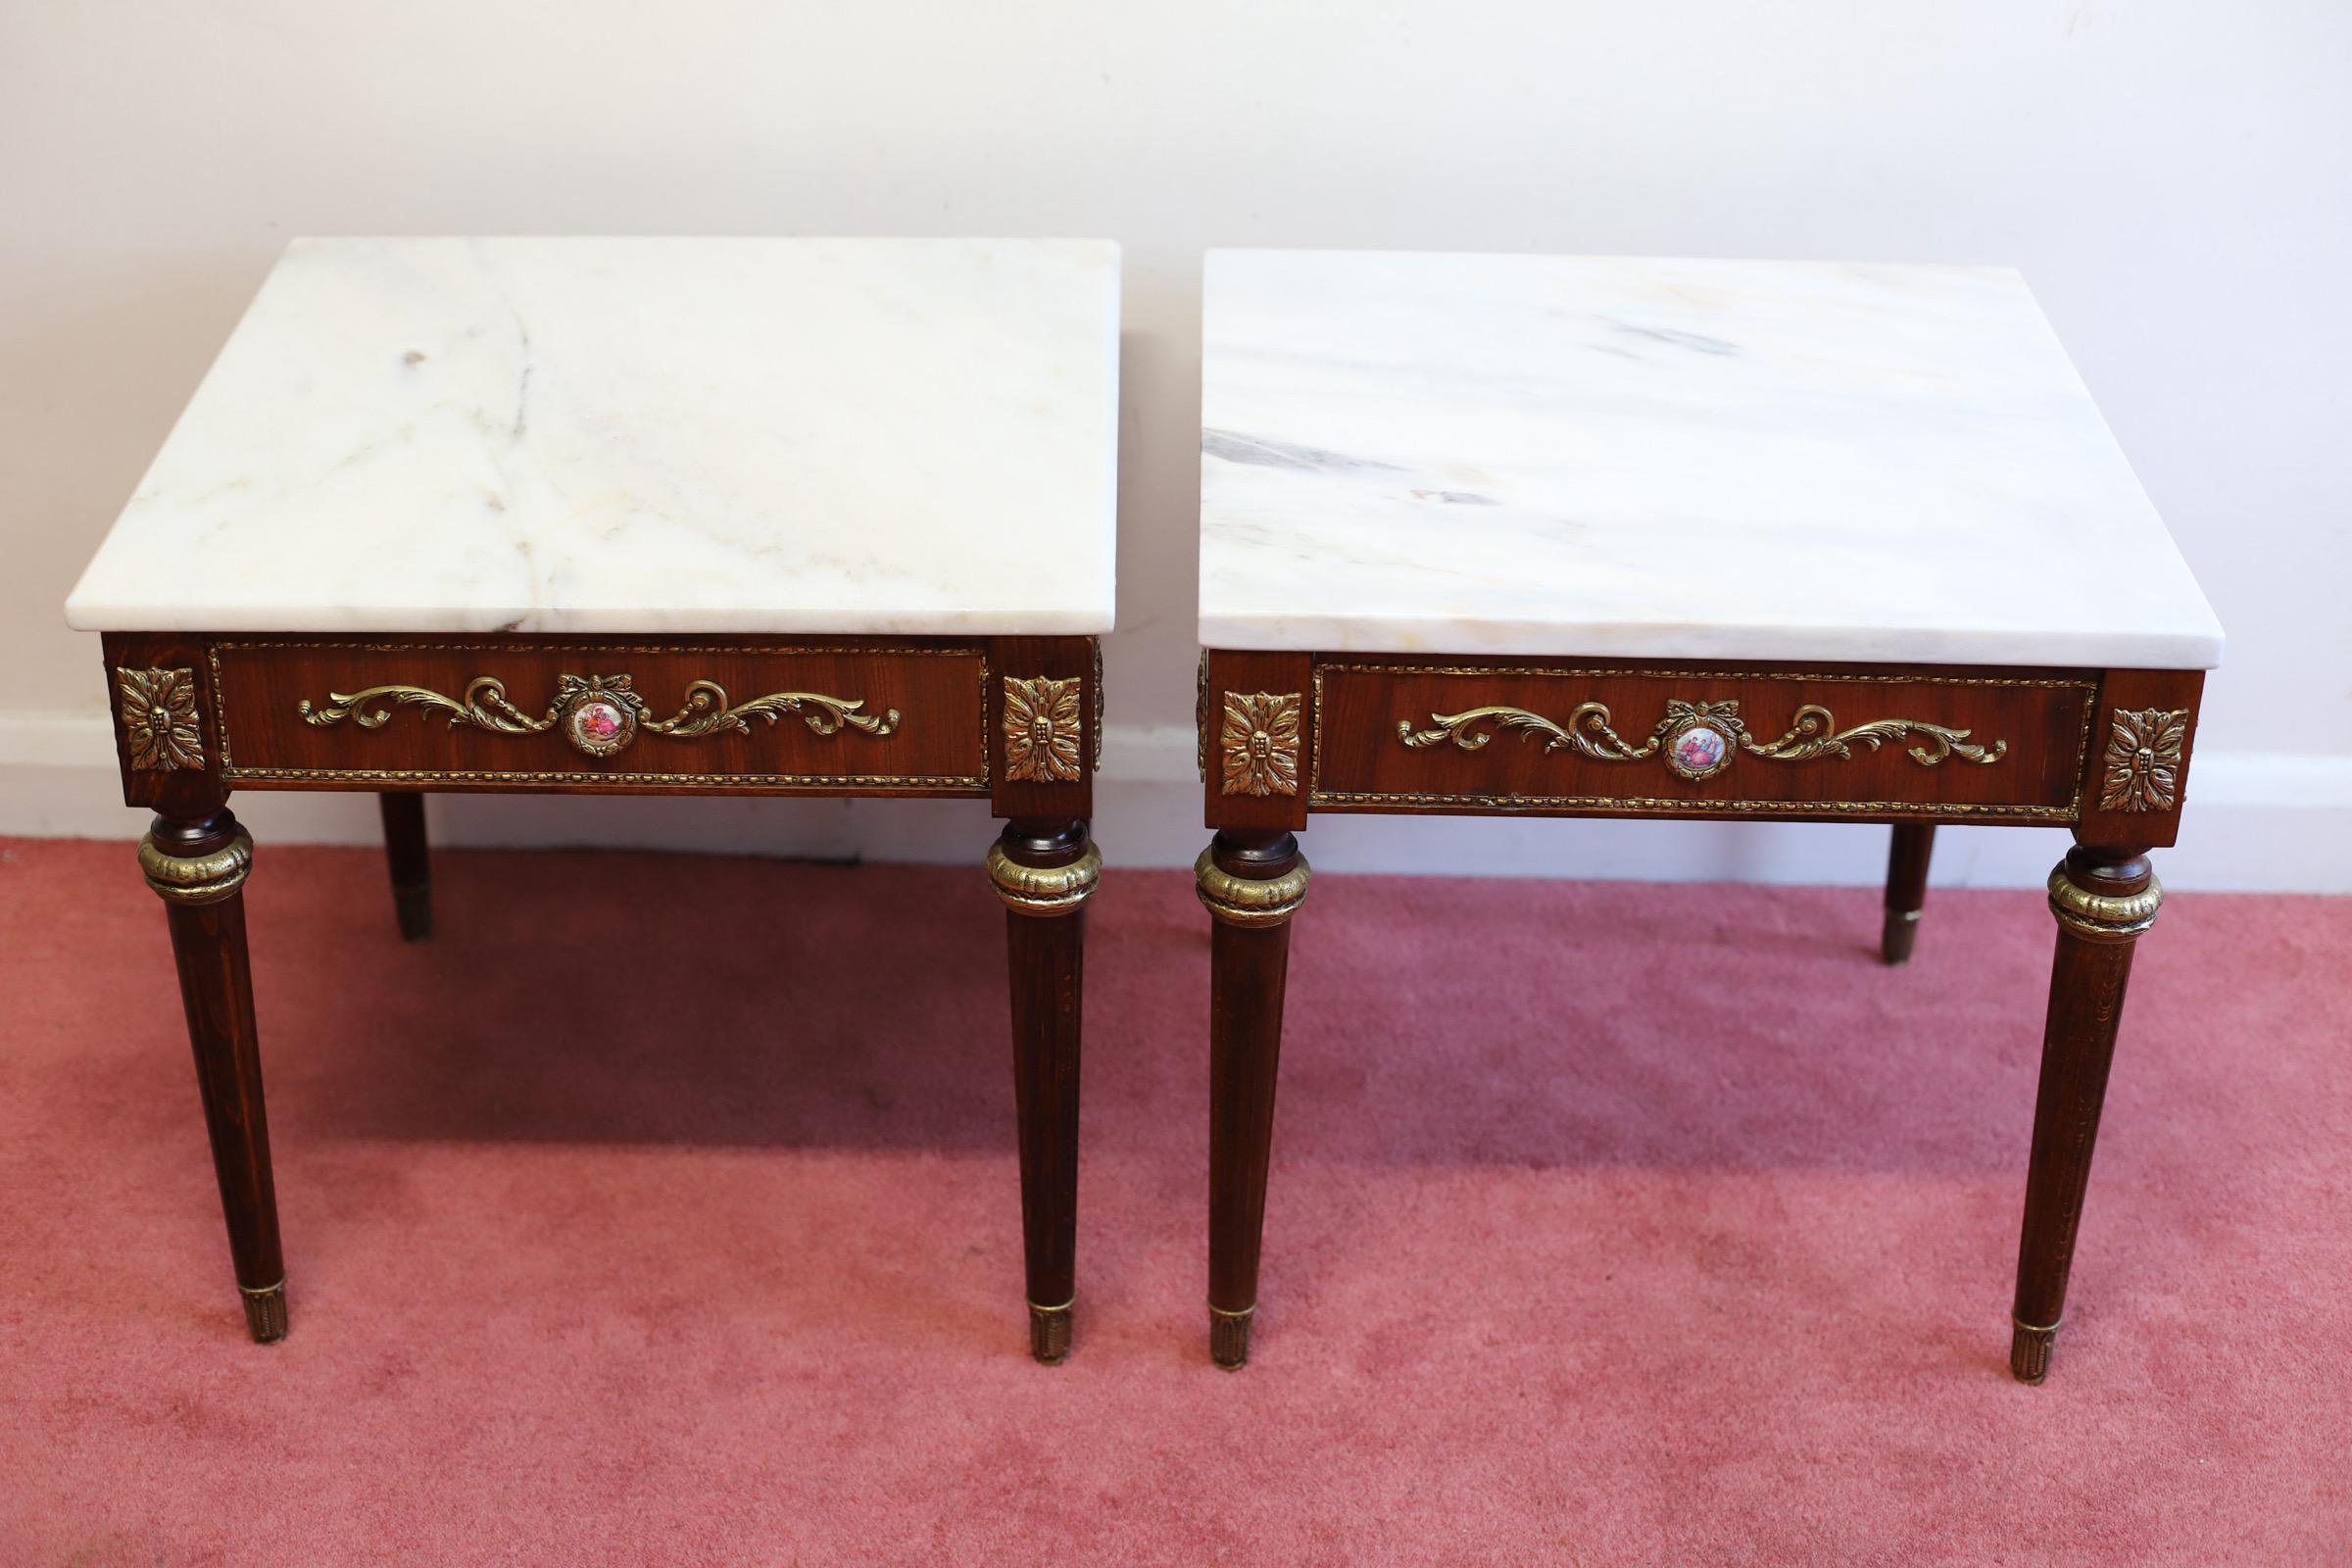 We delight to offer for sale this beautiful pair of marble-topped occasional tables in French Louis XVI taste, modern; the square tops above inset ceramic and gilt metal scroll decoration to the frieze; the corners with acanthus panel mounts, on